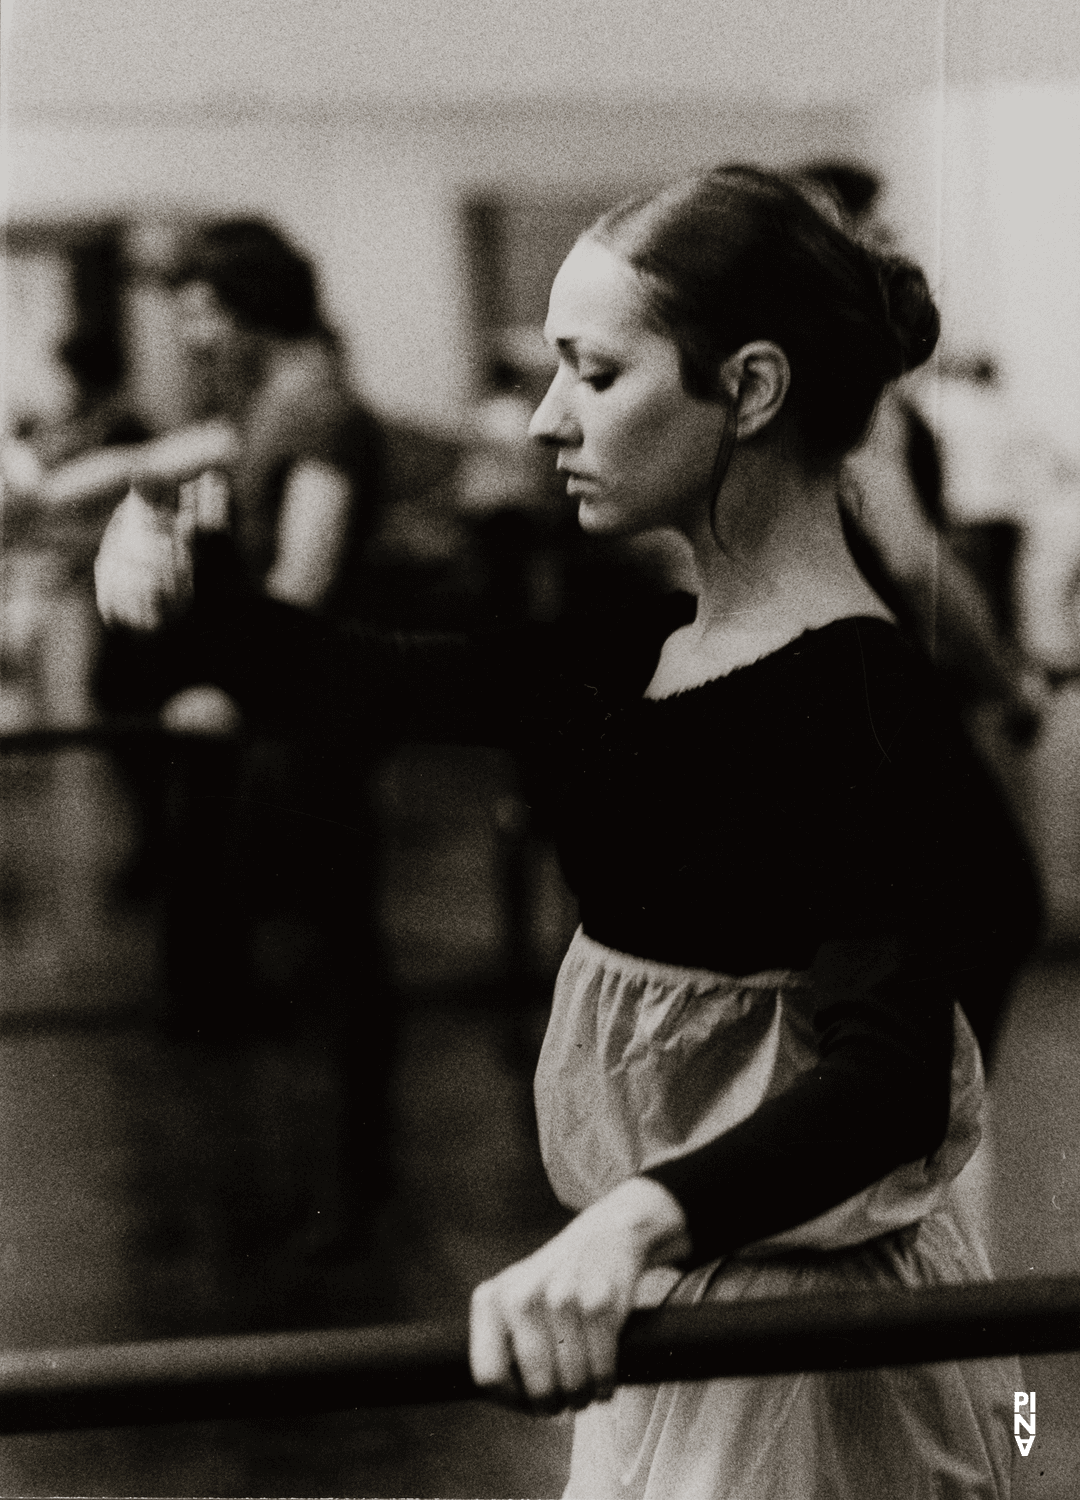 Vivienne Newport in “I'll Do You In…” by Pina Bausch